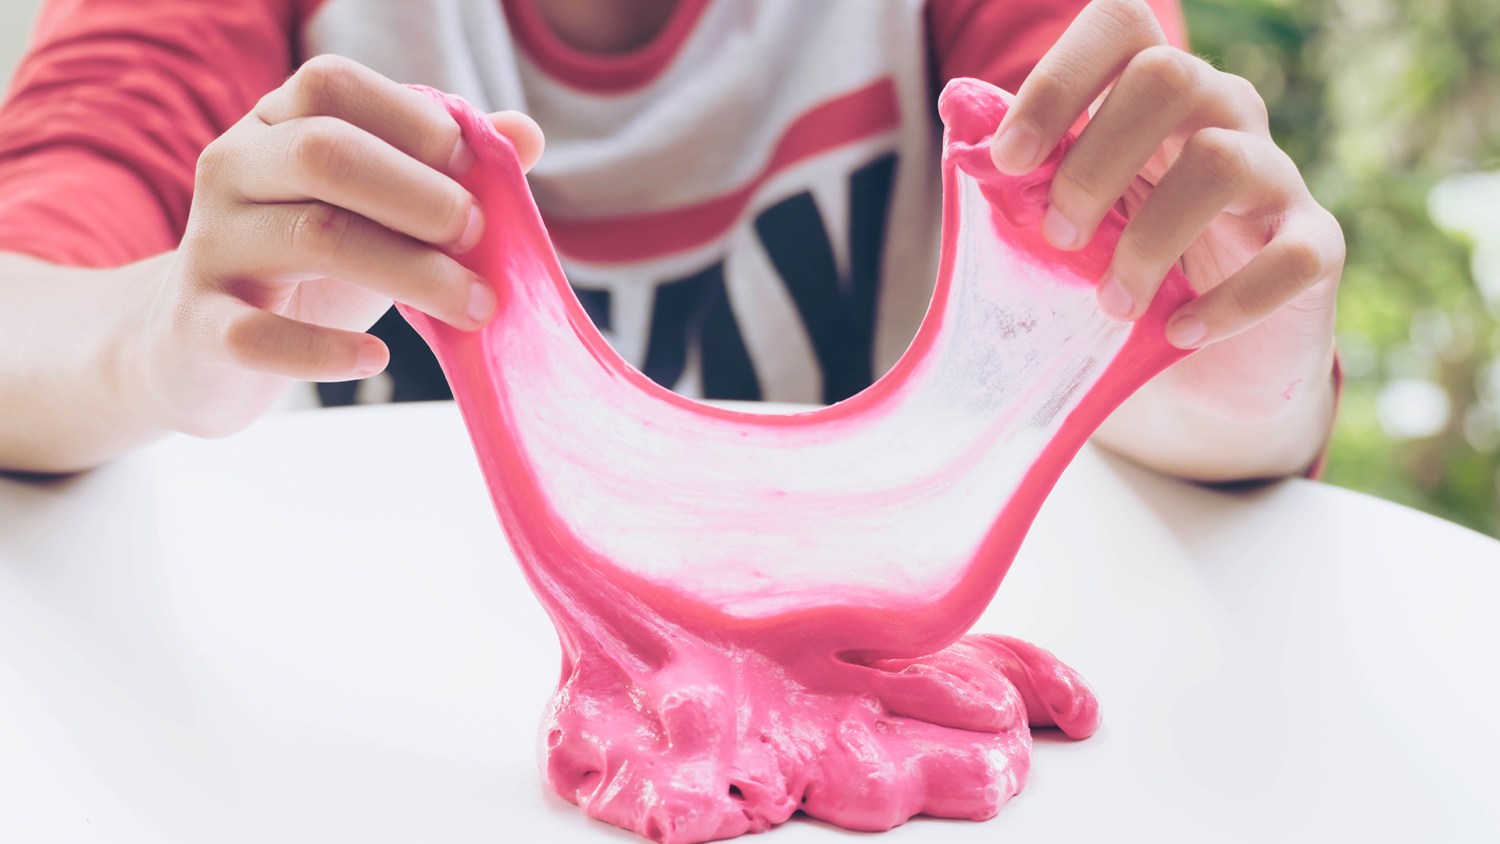 Why I Won't be Making Slime at Home with My Kids